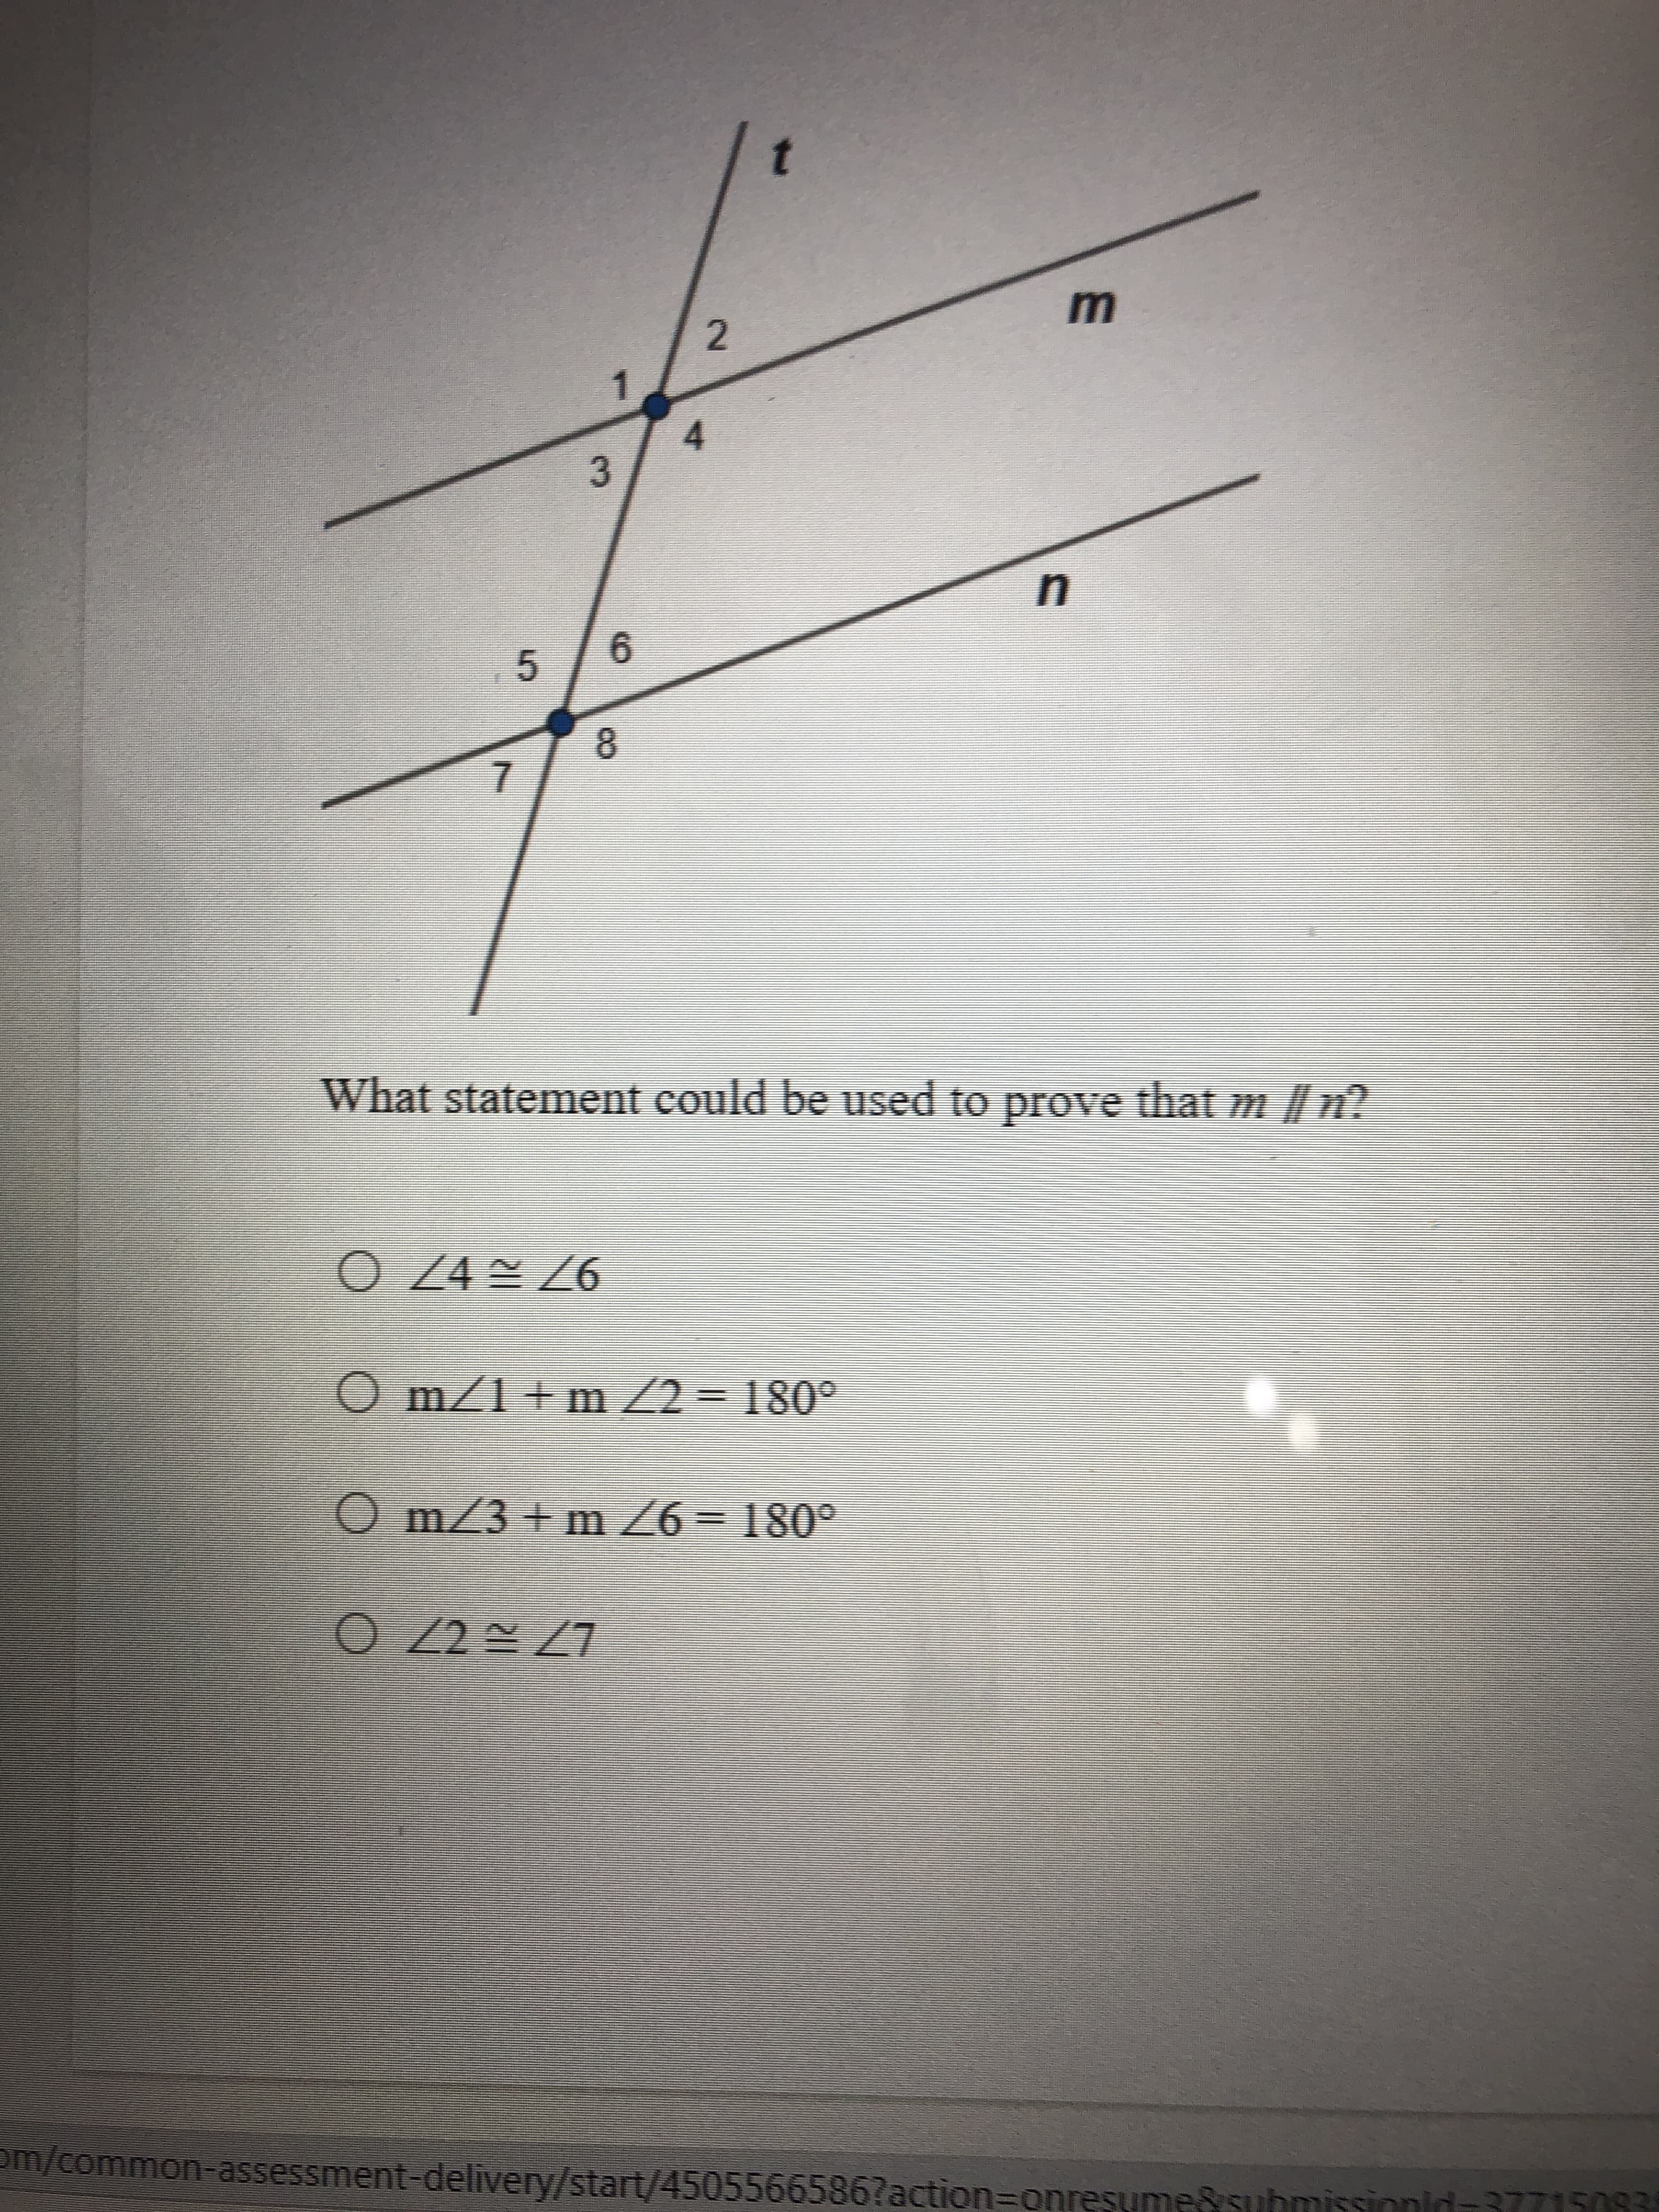 What statement could be used to prove that m f n?
